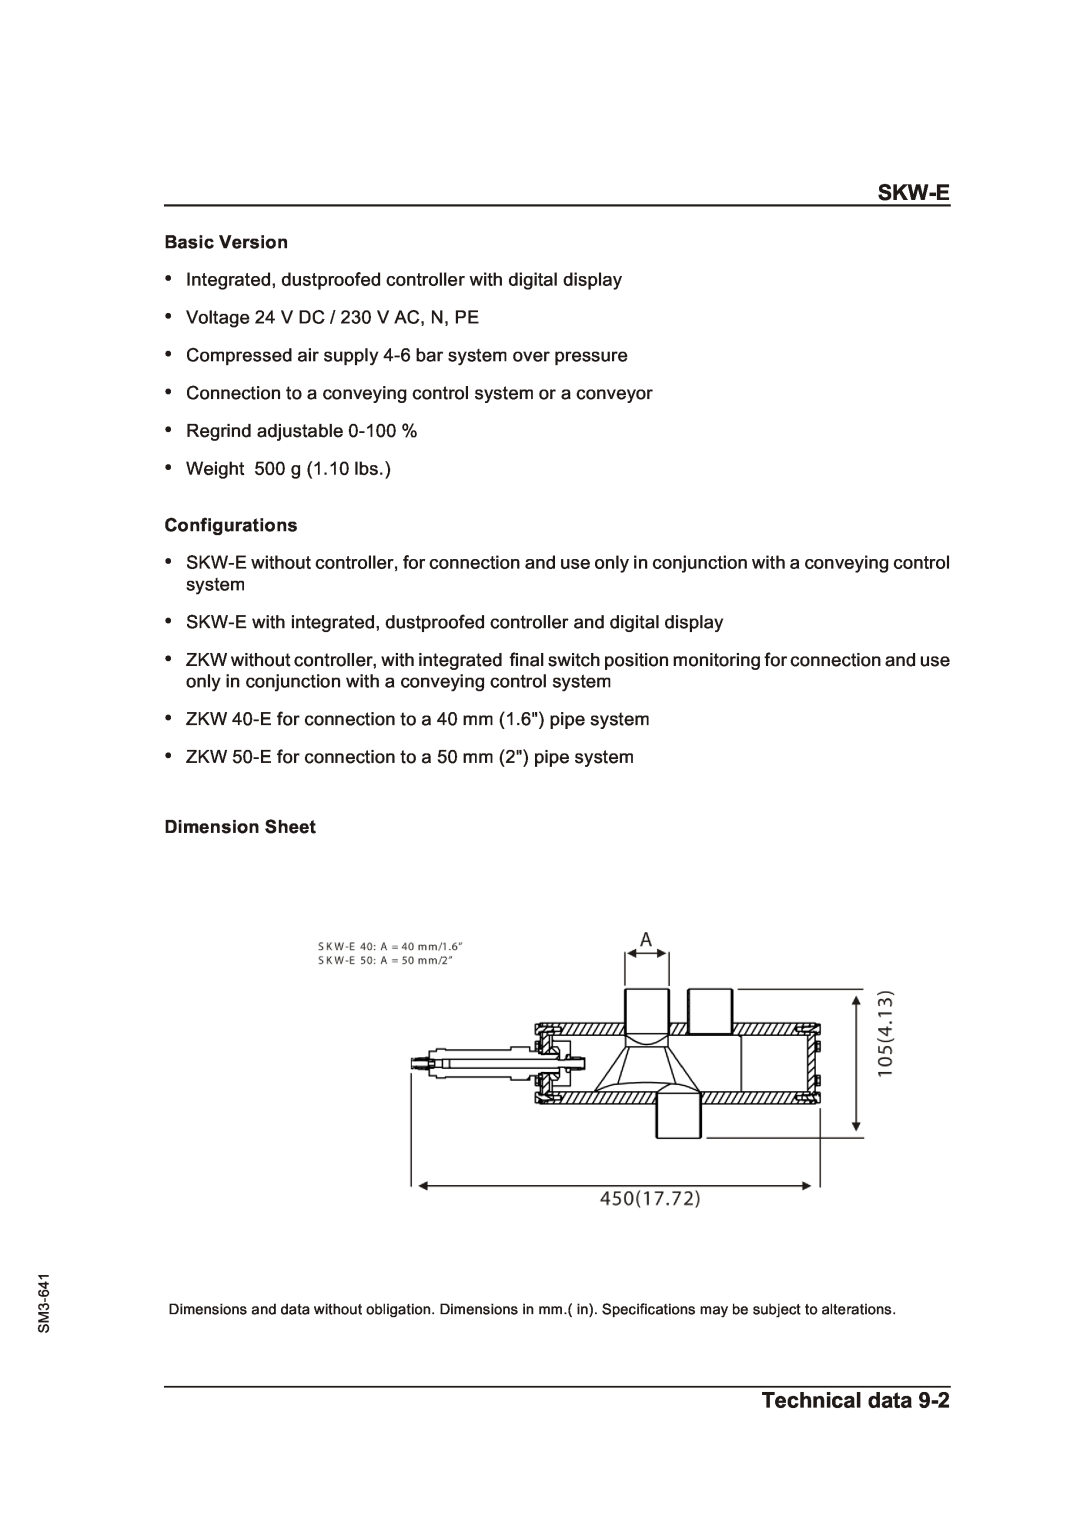 Sterling Plumbing SKW-E manual Skw-E, Technical data, Basic Version, Configurations, Dimension Sheet 